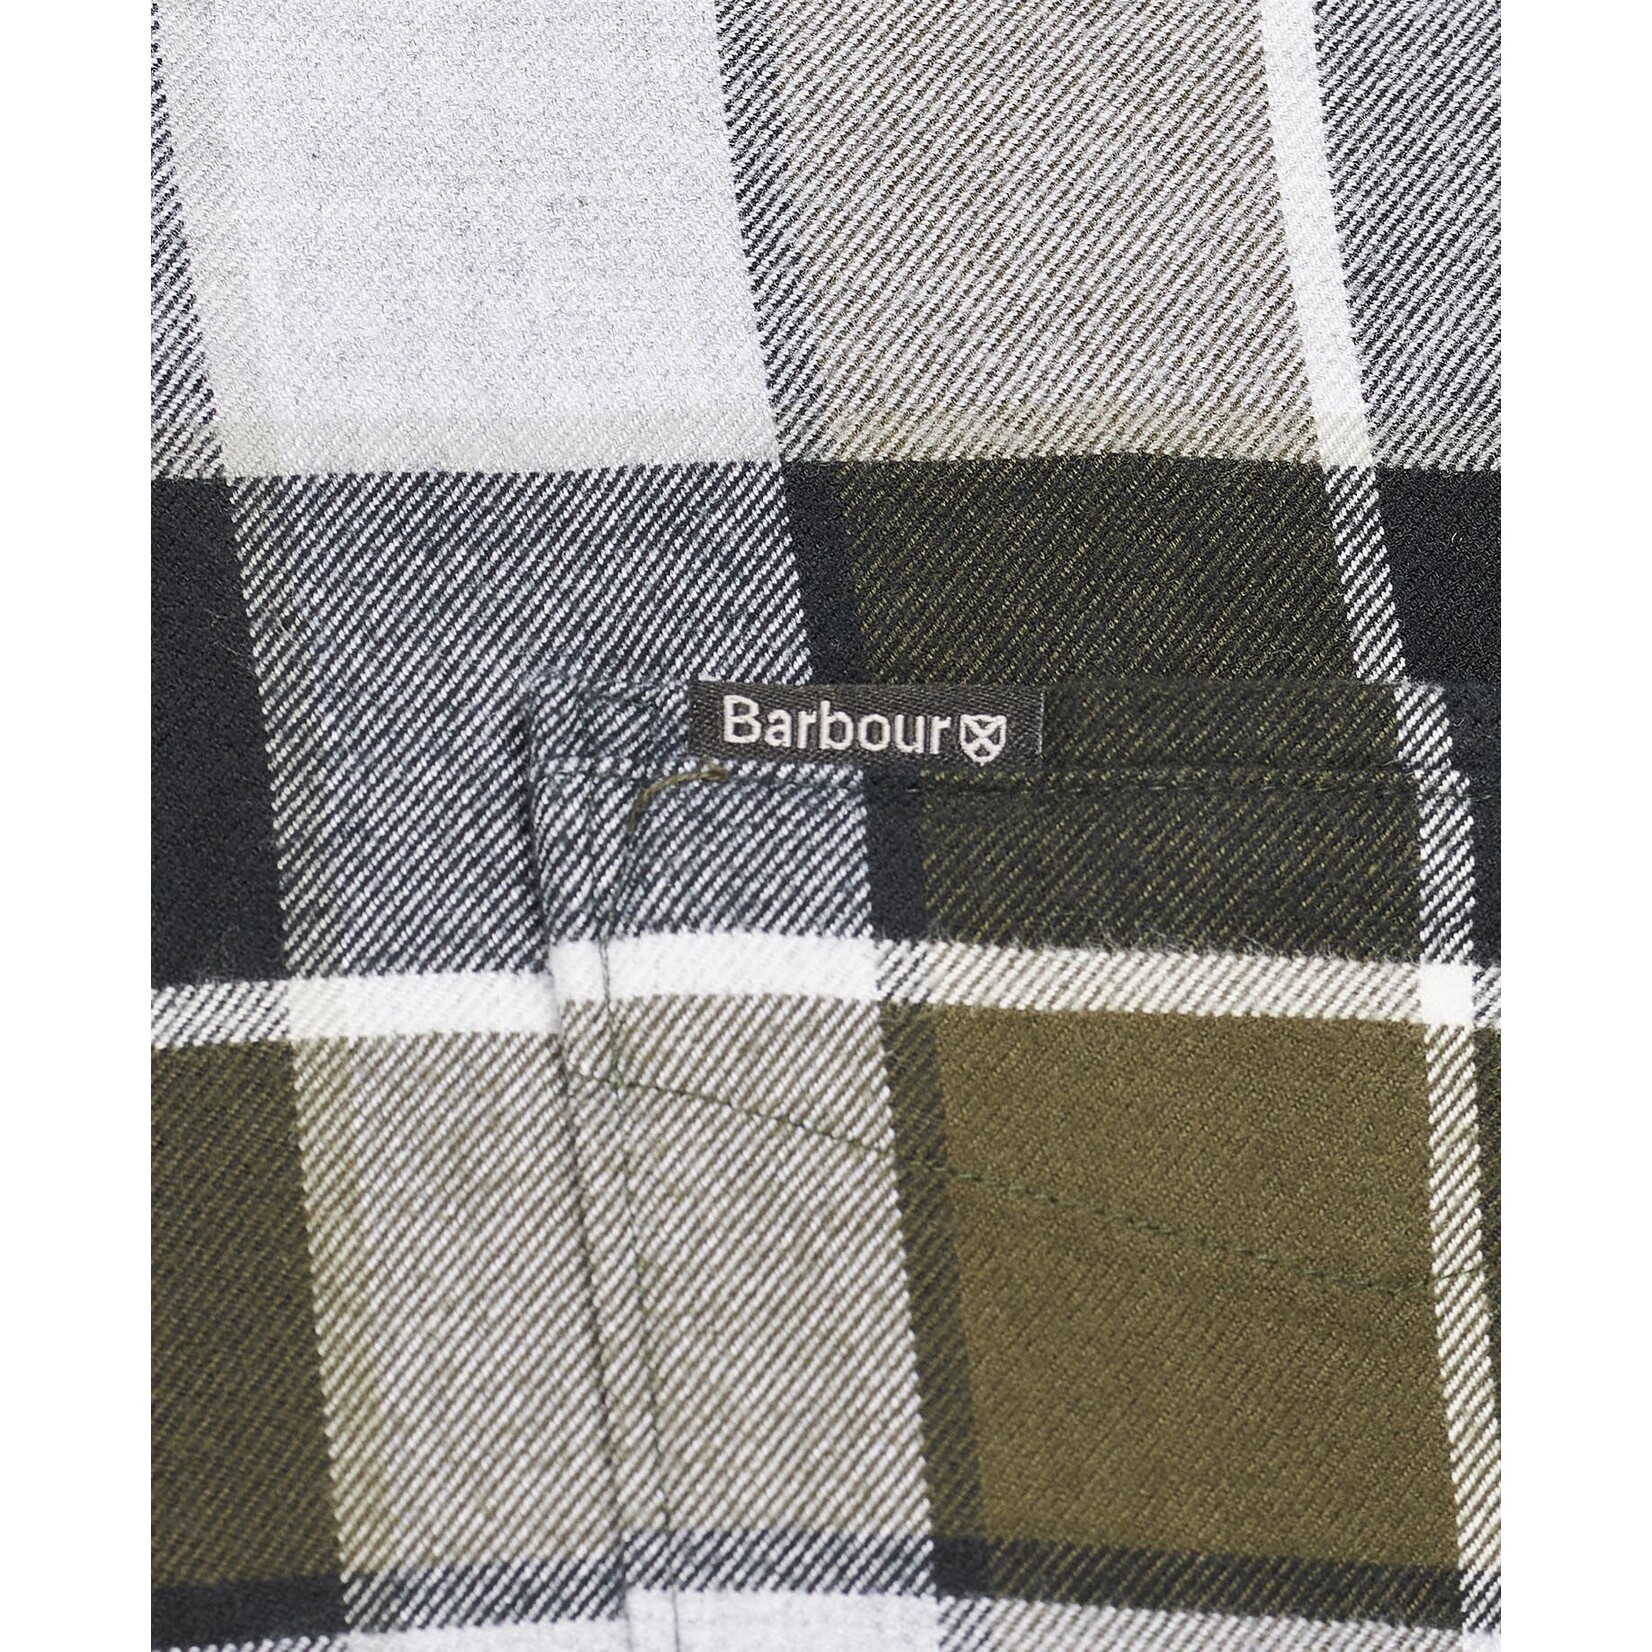 Barbour Men's Valley Tailored Shirt